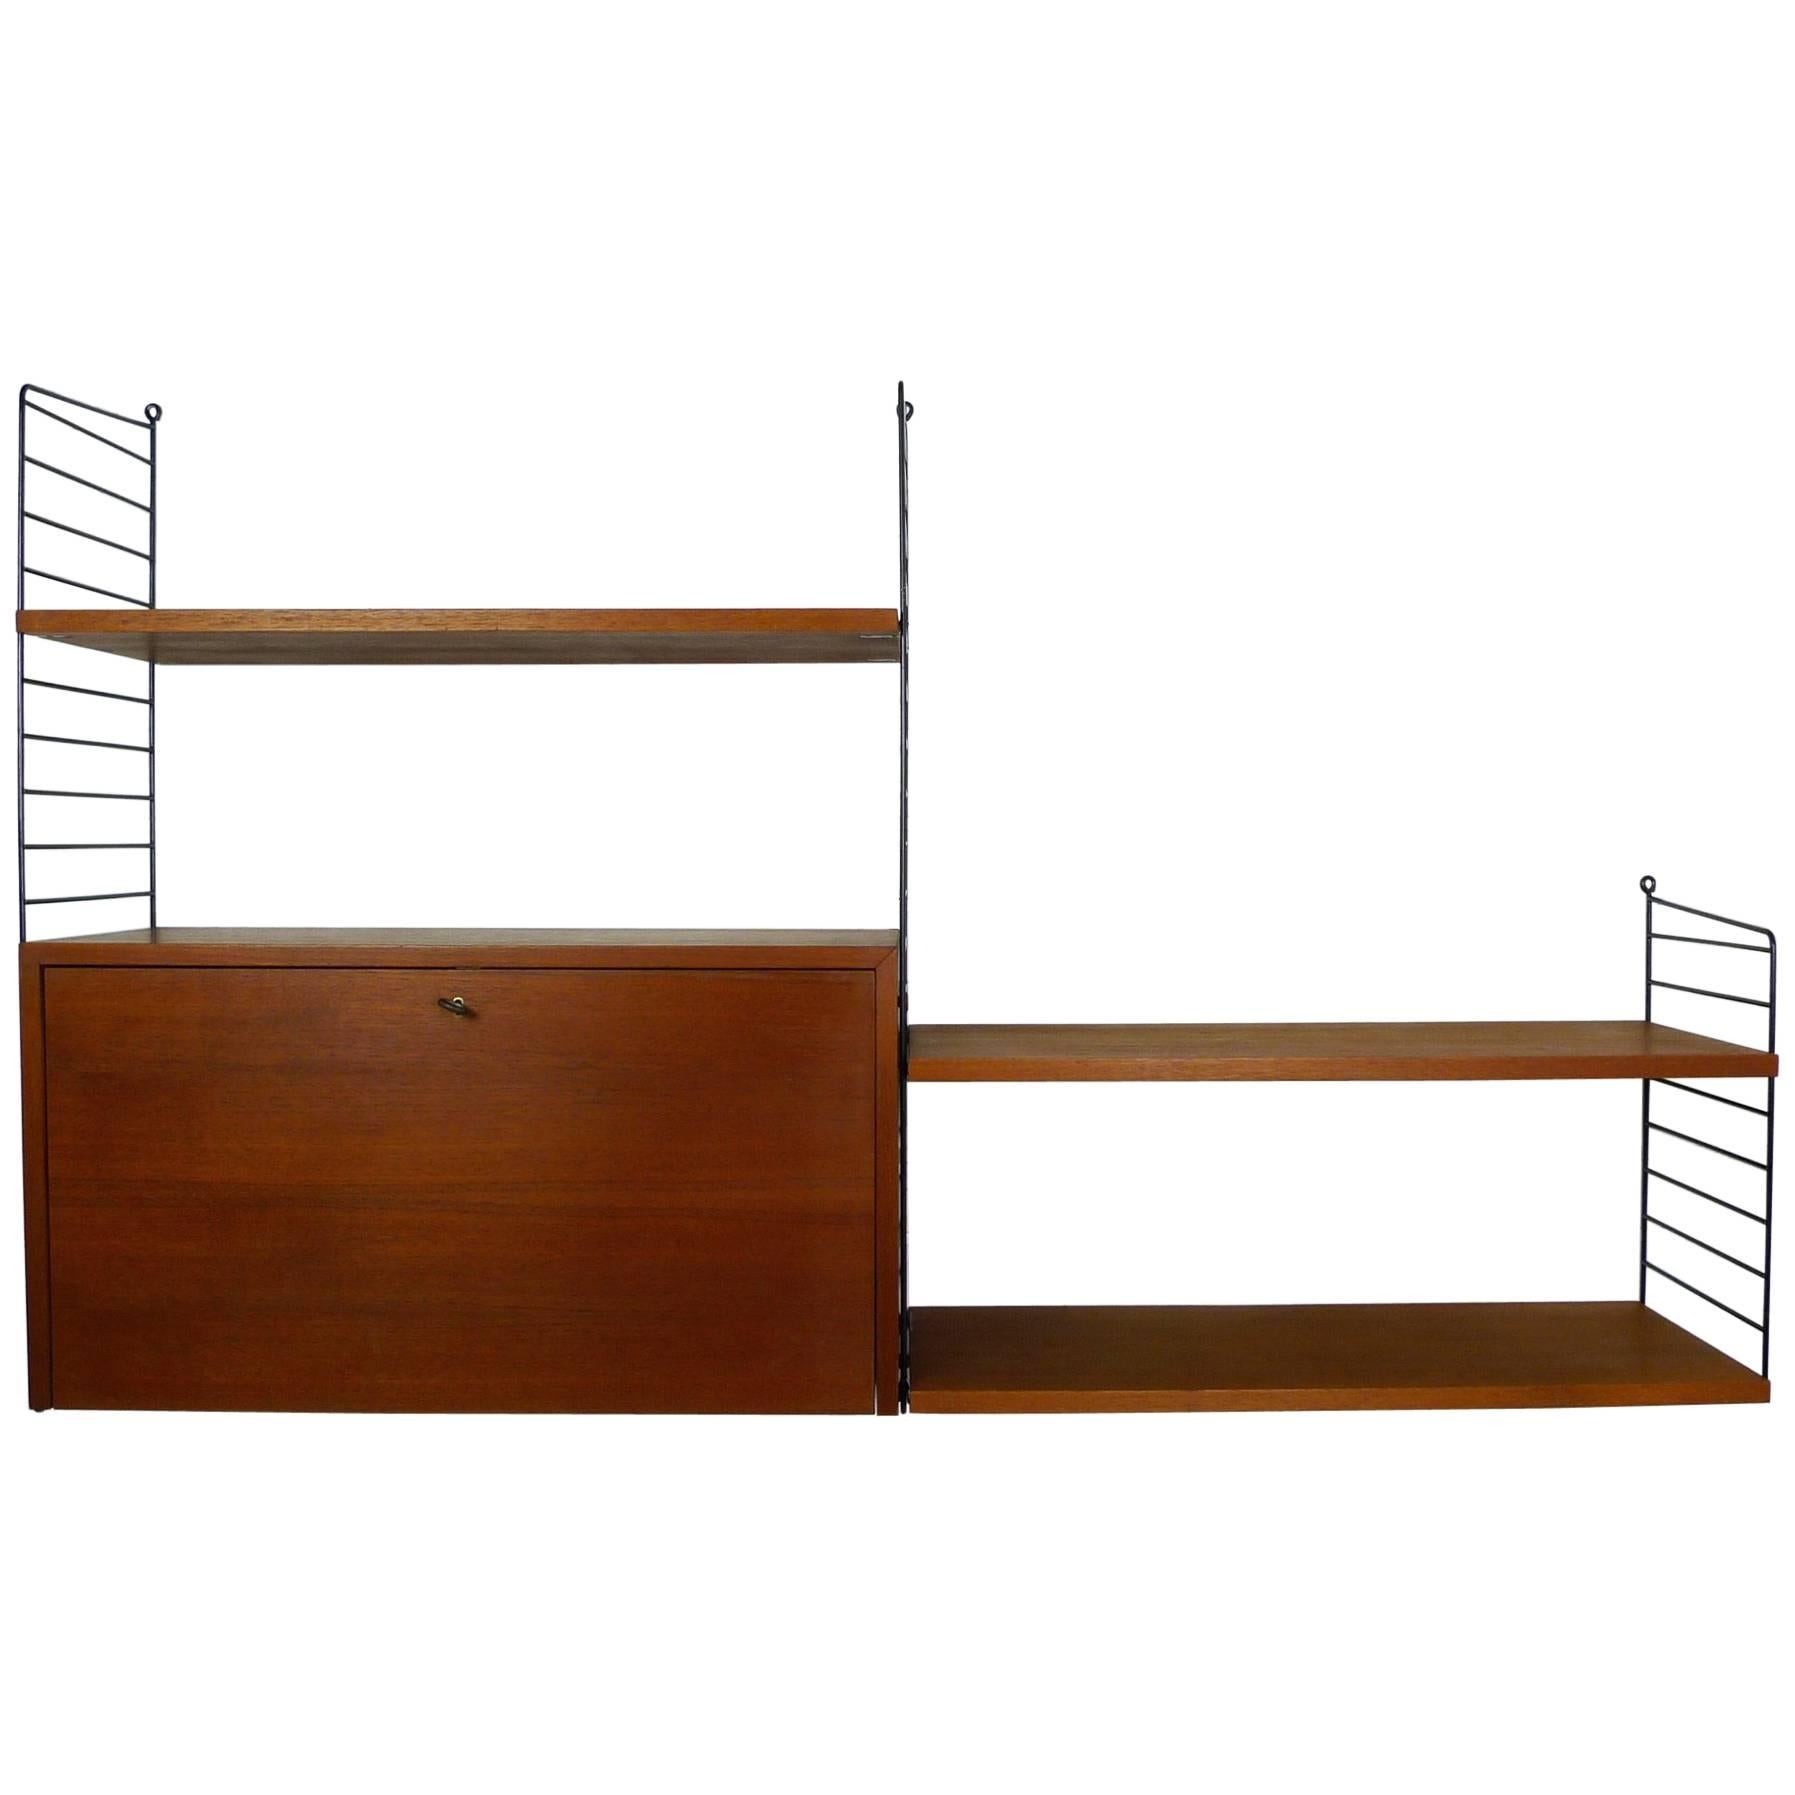 Swedish Wall Unit with Teak Box and Shelves by Nisse Strinning for String, 1950s For Sale